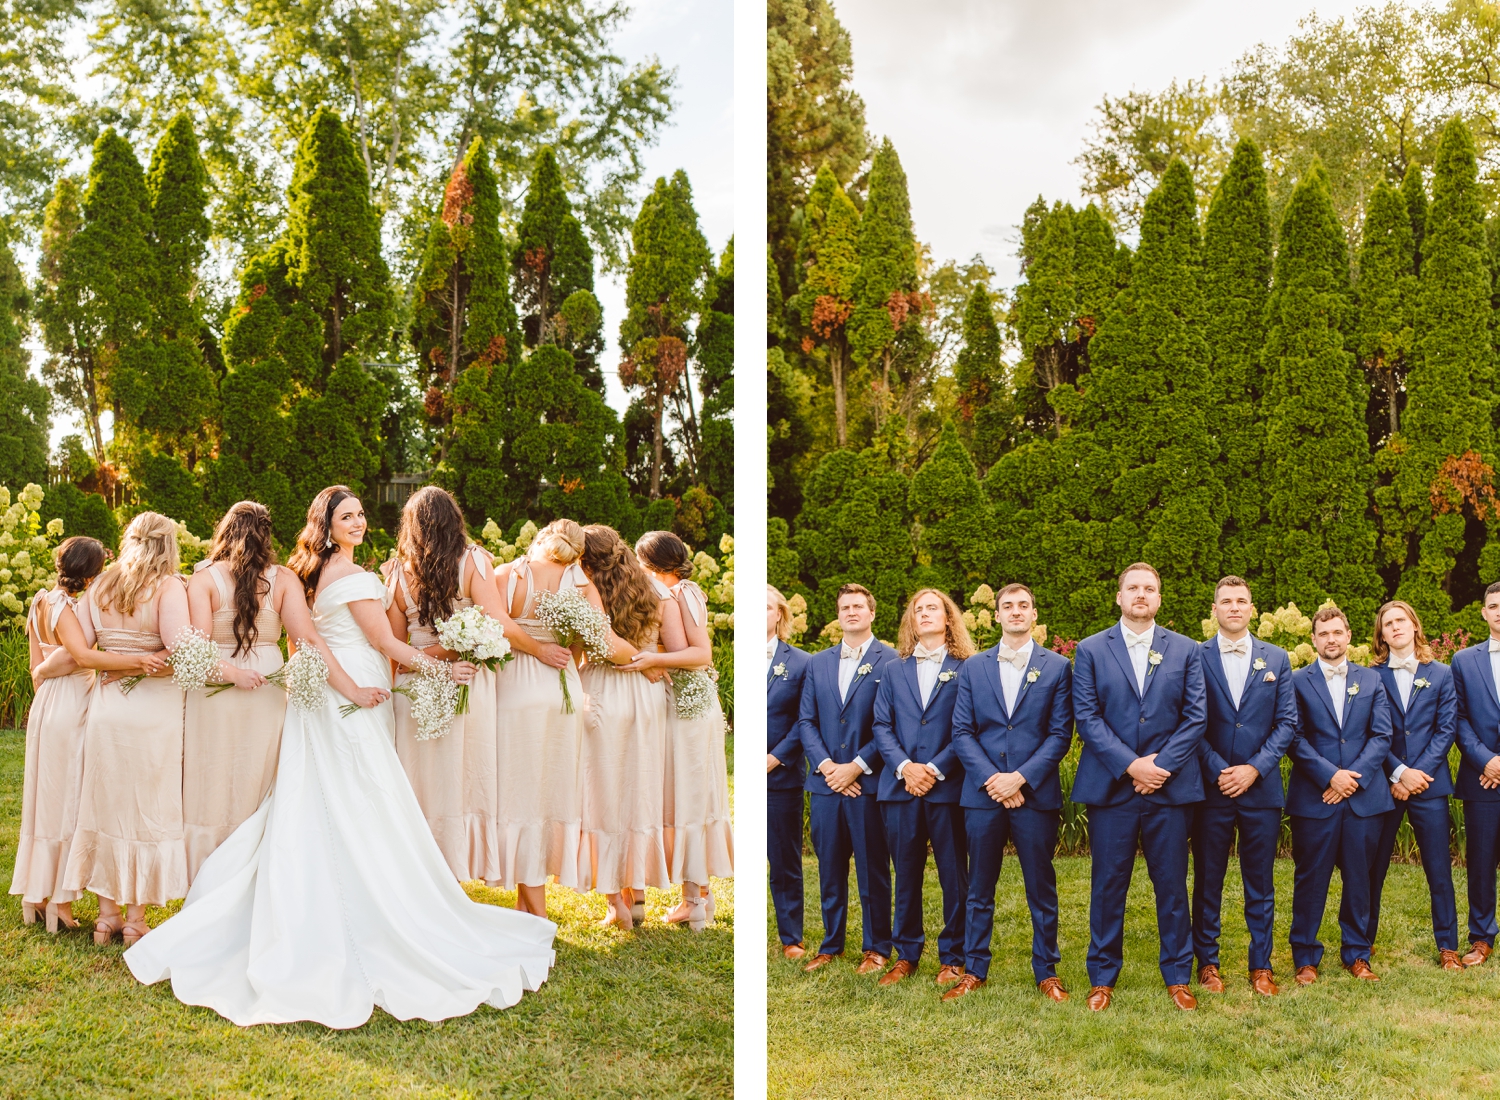 Bridesmaids facing away from camera while bride looks over her shoulder | groom and groomsmen standing in Ladew Topiary Gardens | Brooke Michelle Photo